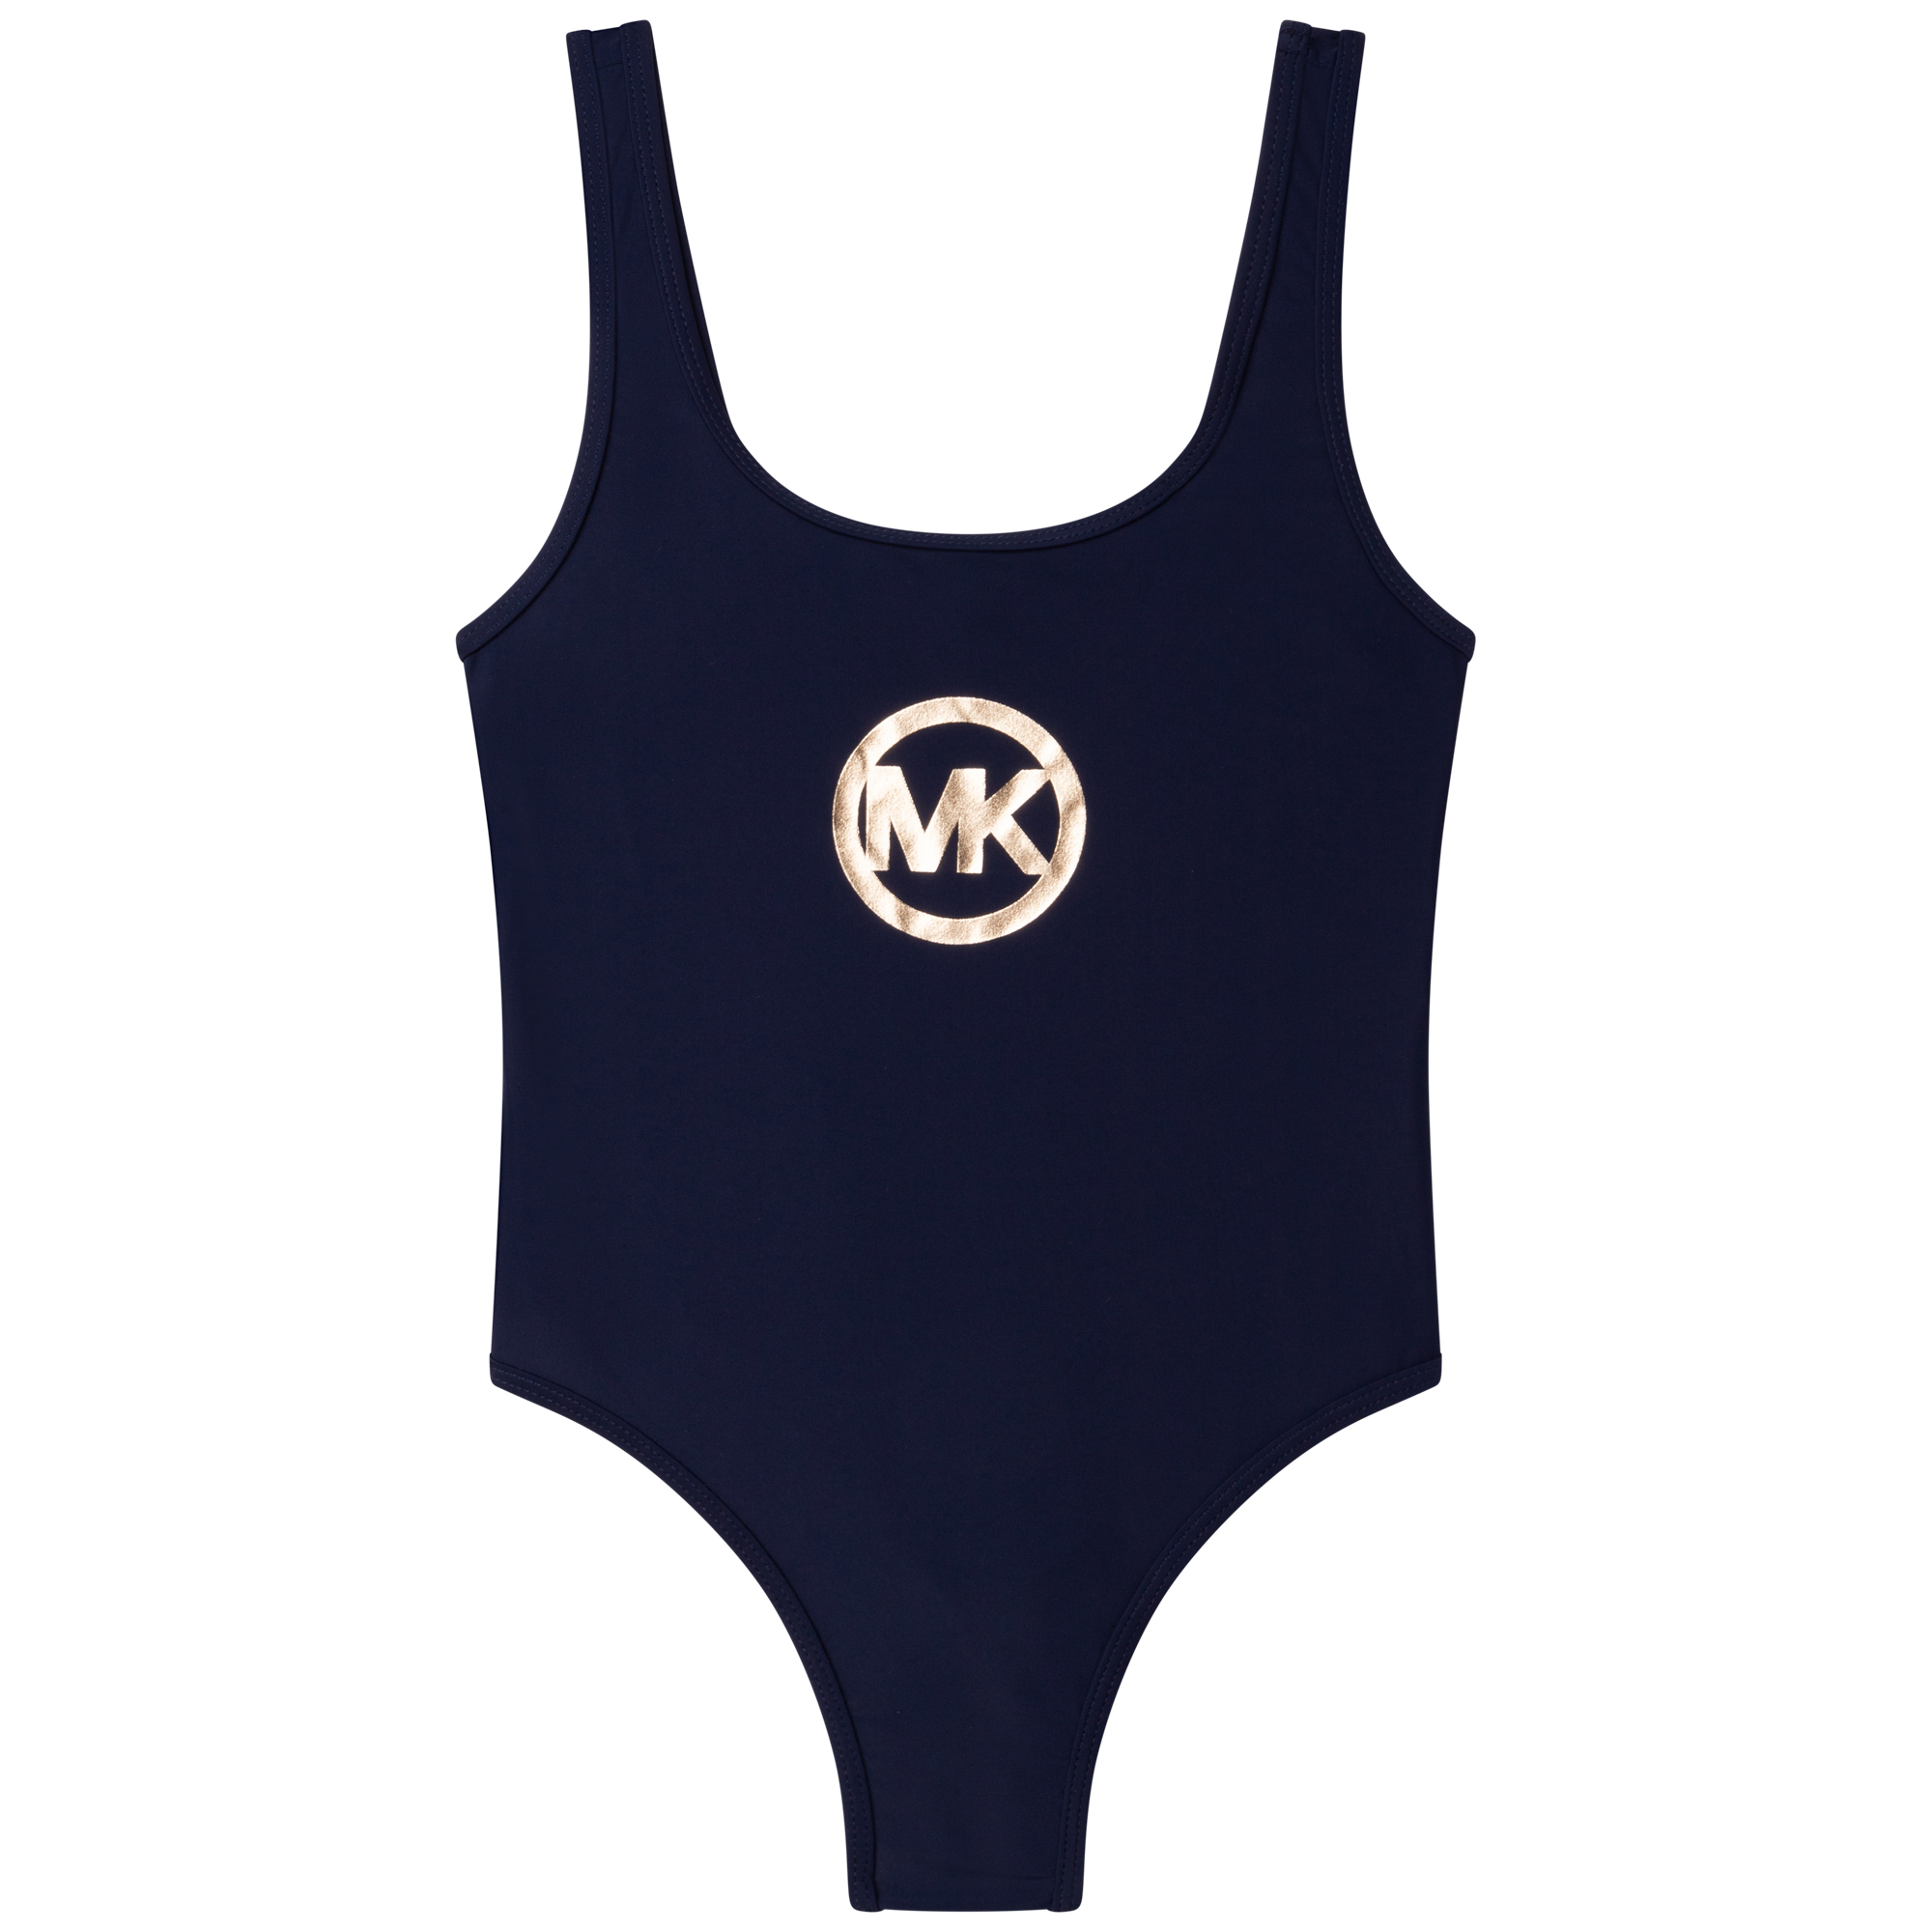 One-piece Bathing Suit MICHAEL KORS for GIRL